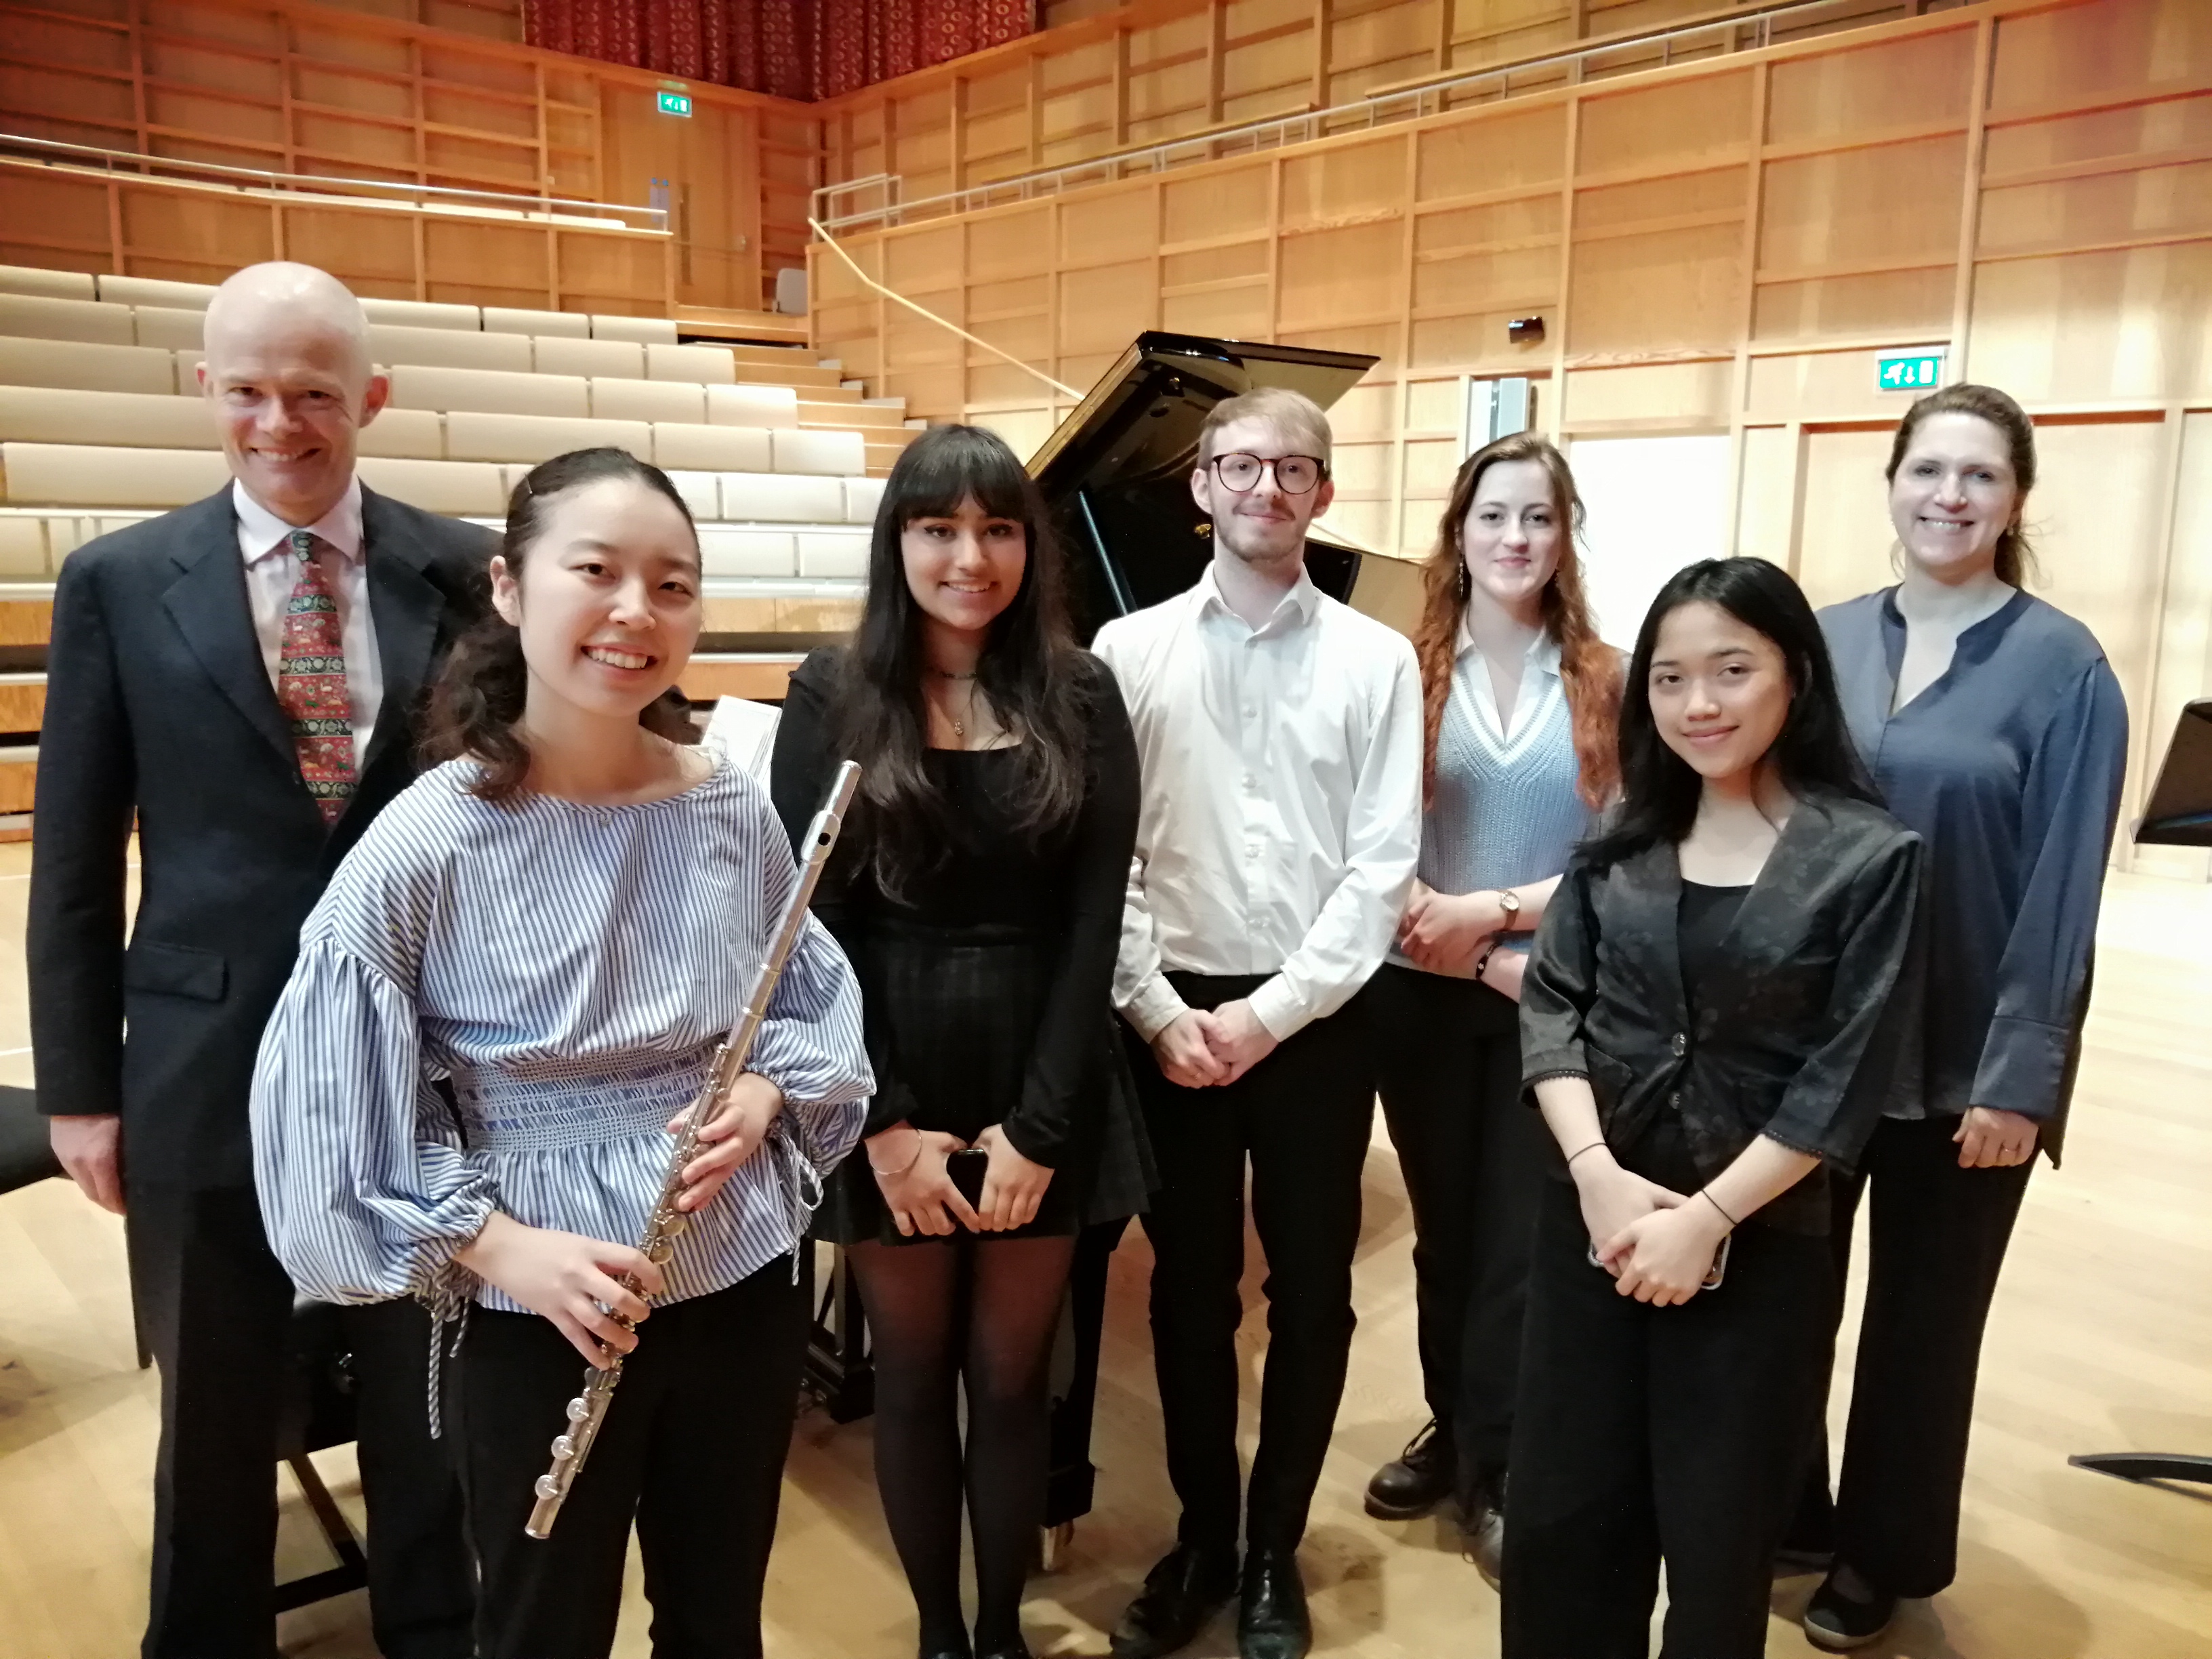 In pictures: Music Scholars’ masterclass with London Conchord Ensemble